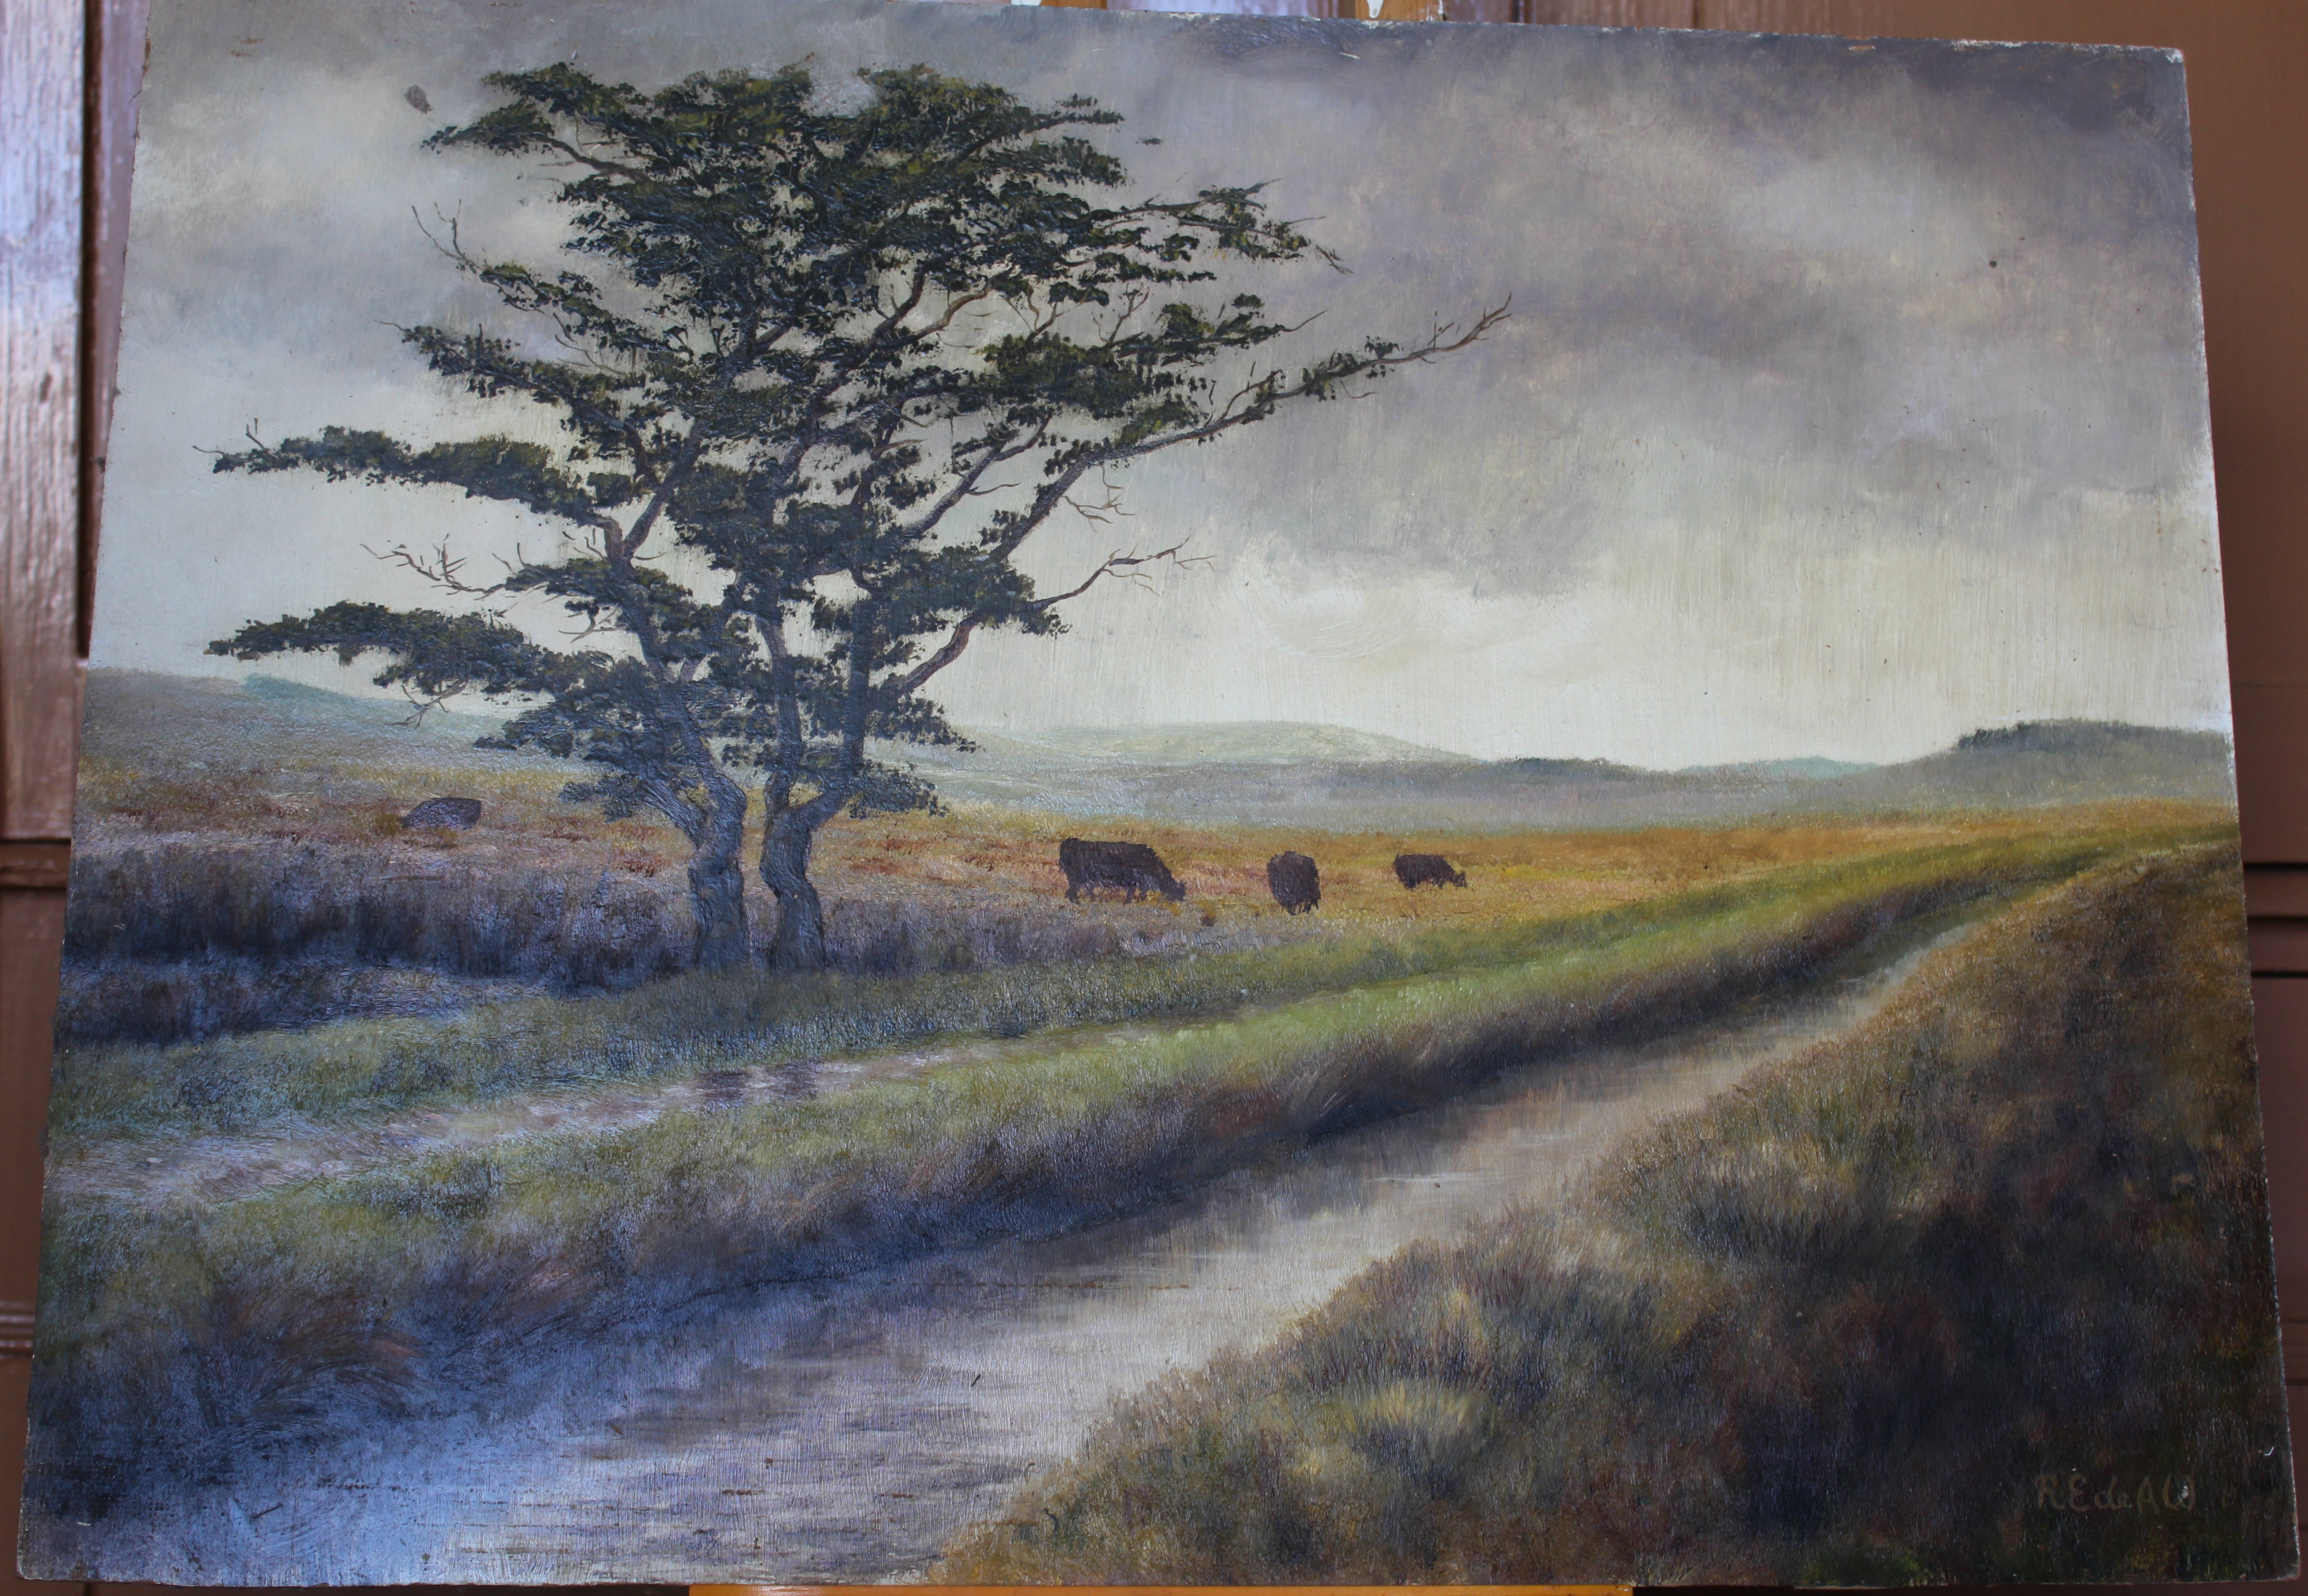 •MOORLAND LANDSCAPE WITH LEAT, TREES AND CATTLE Signed unframed oil on board, 45.5 x 60.5cm.